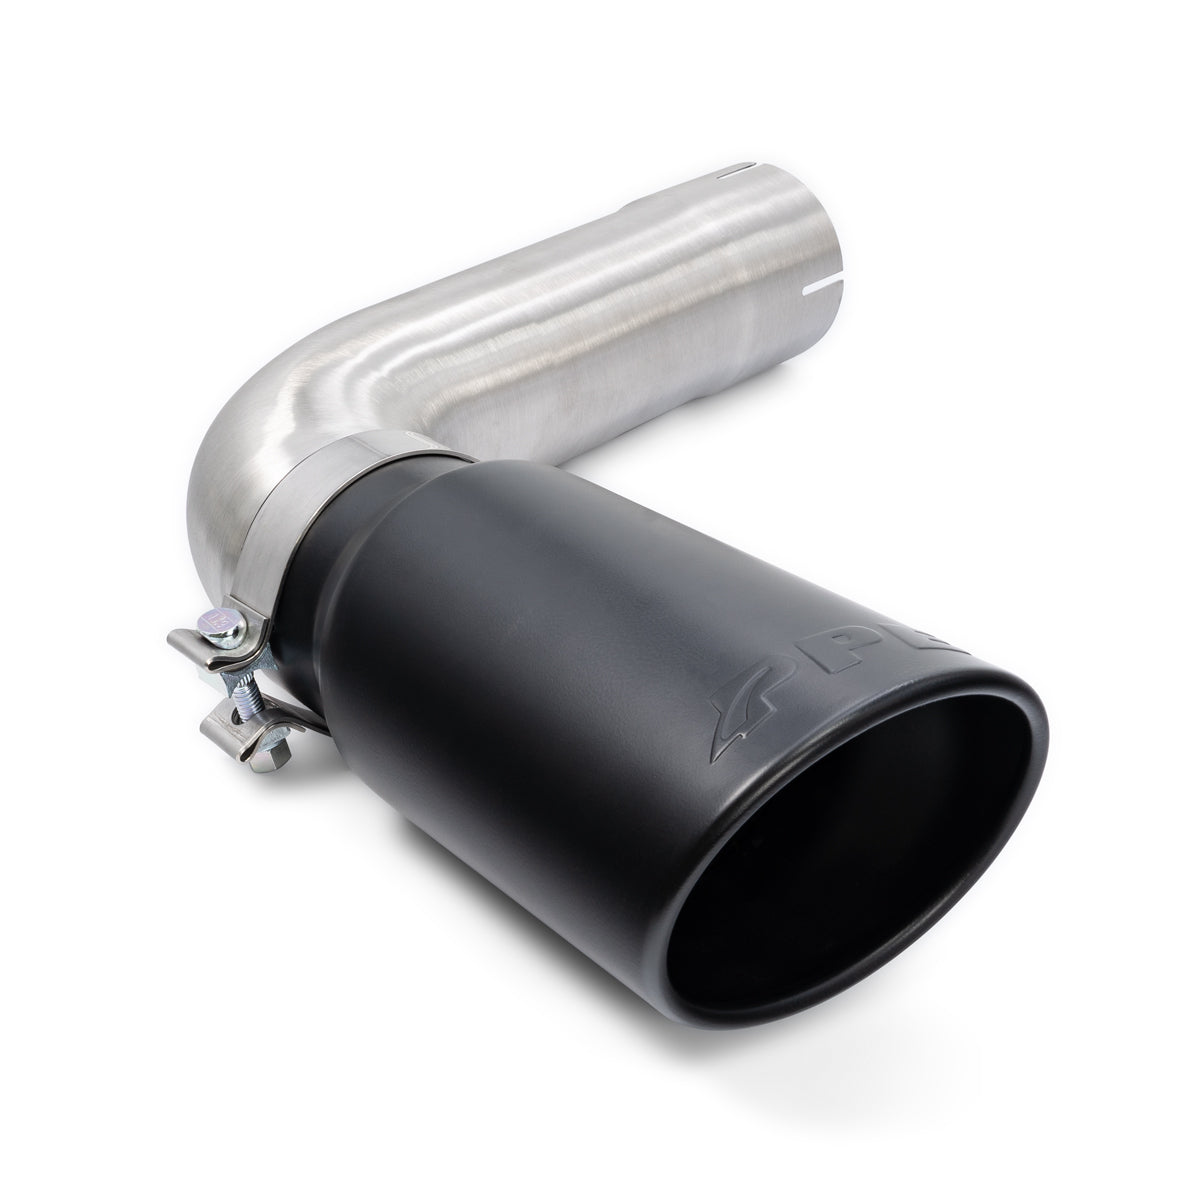 2020+ GM 6.6L Duramax 304 Stainless Steel Four Inch Performance Exhaust Upgrade Black